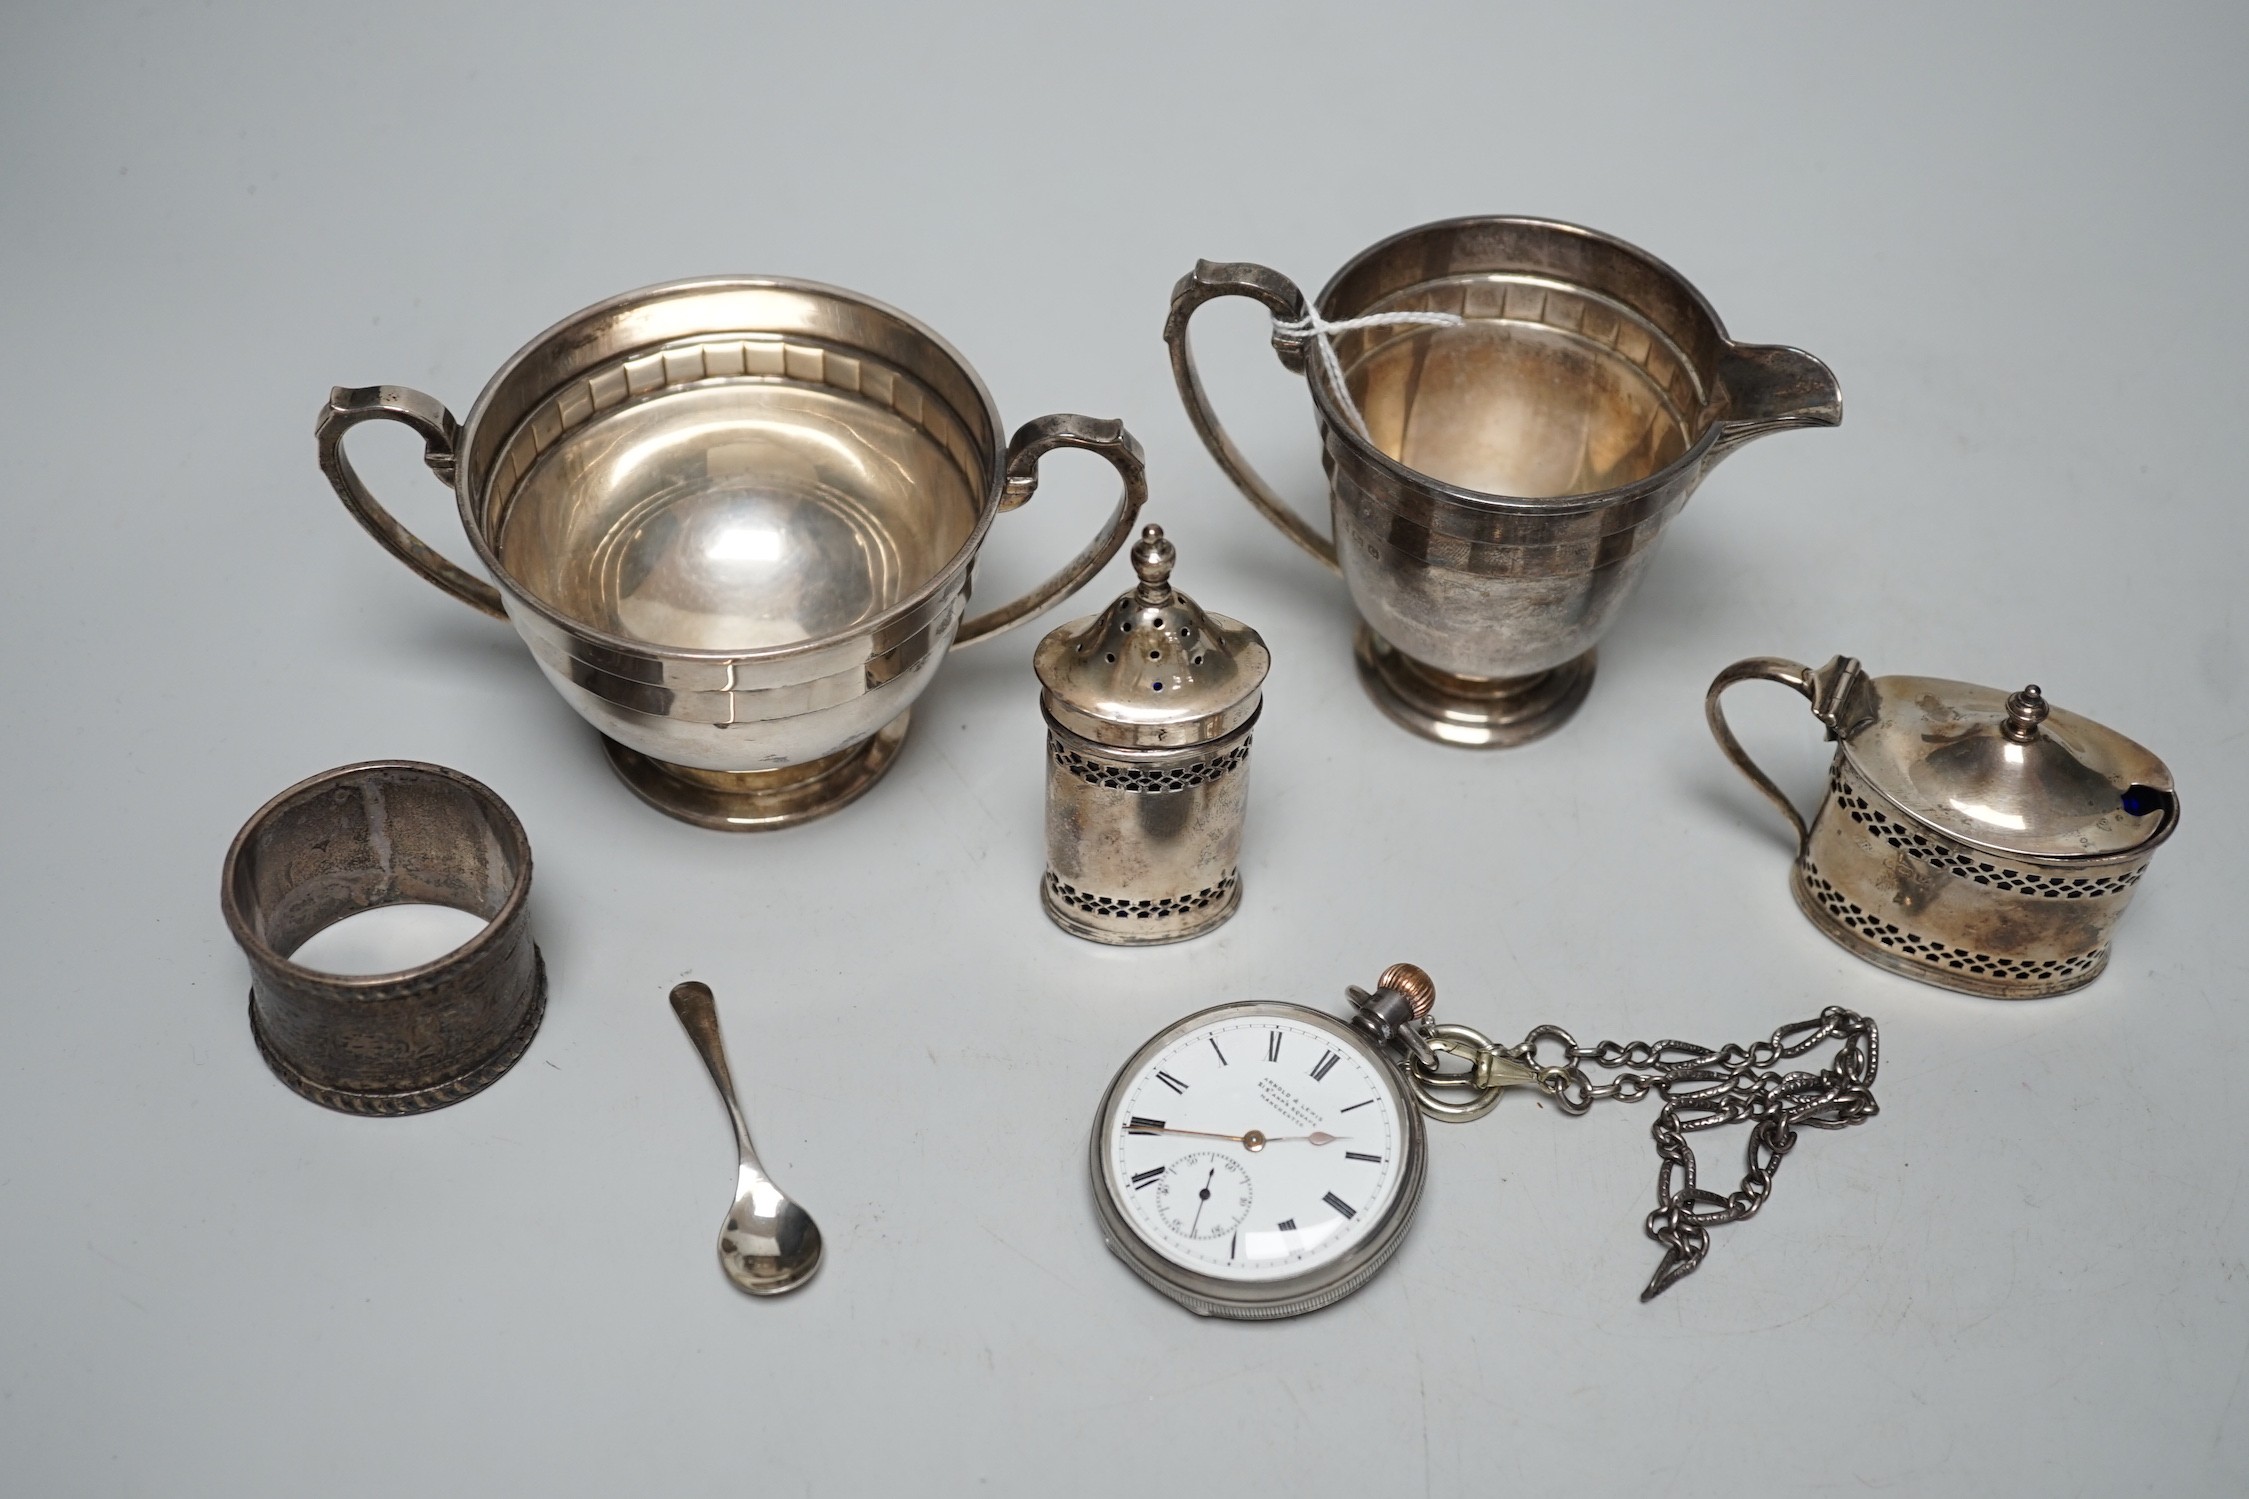 Small silverware, including a George V cream jug and matching sugar bowl, a mustard pot and matching pepper pot, silver serviette ring and a gentleman’s silver pocket watch and chain.